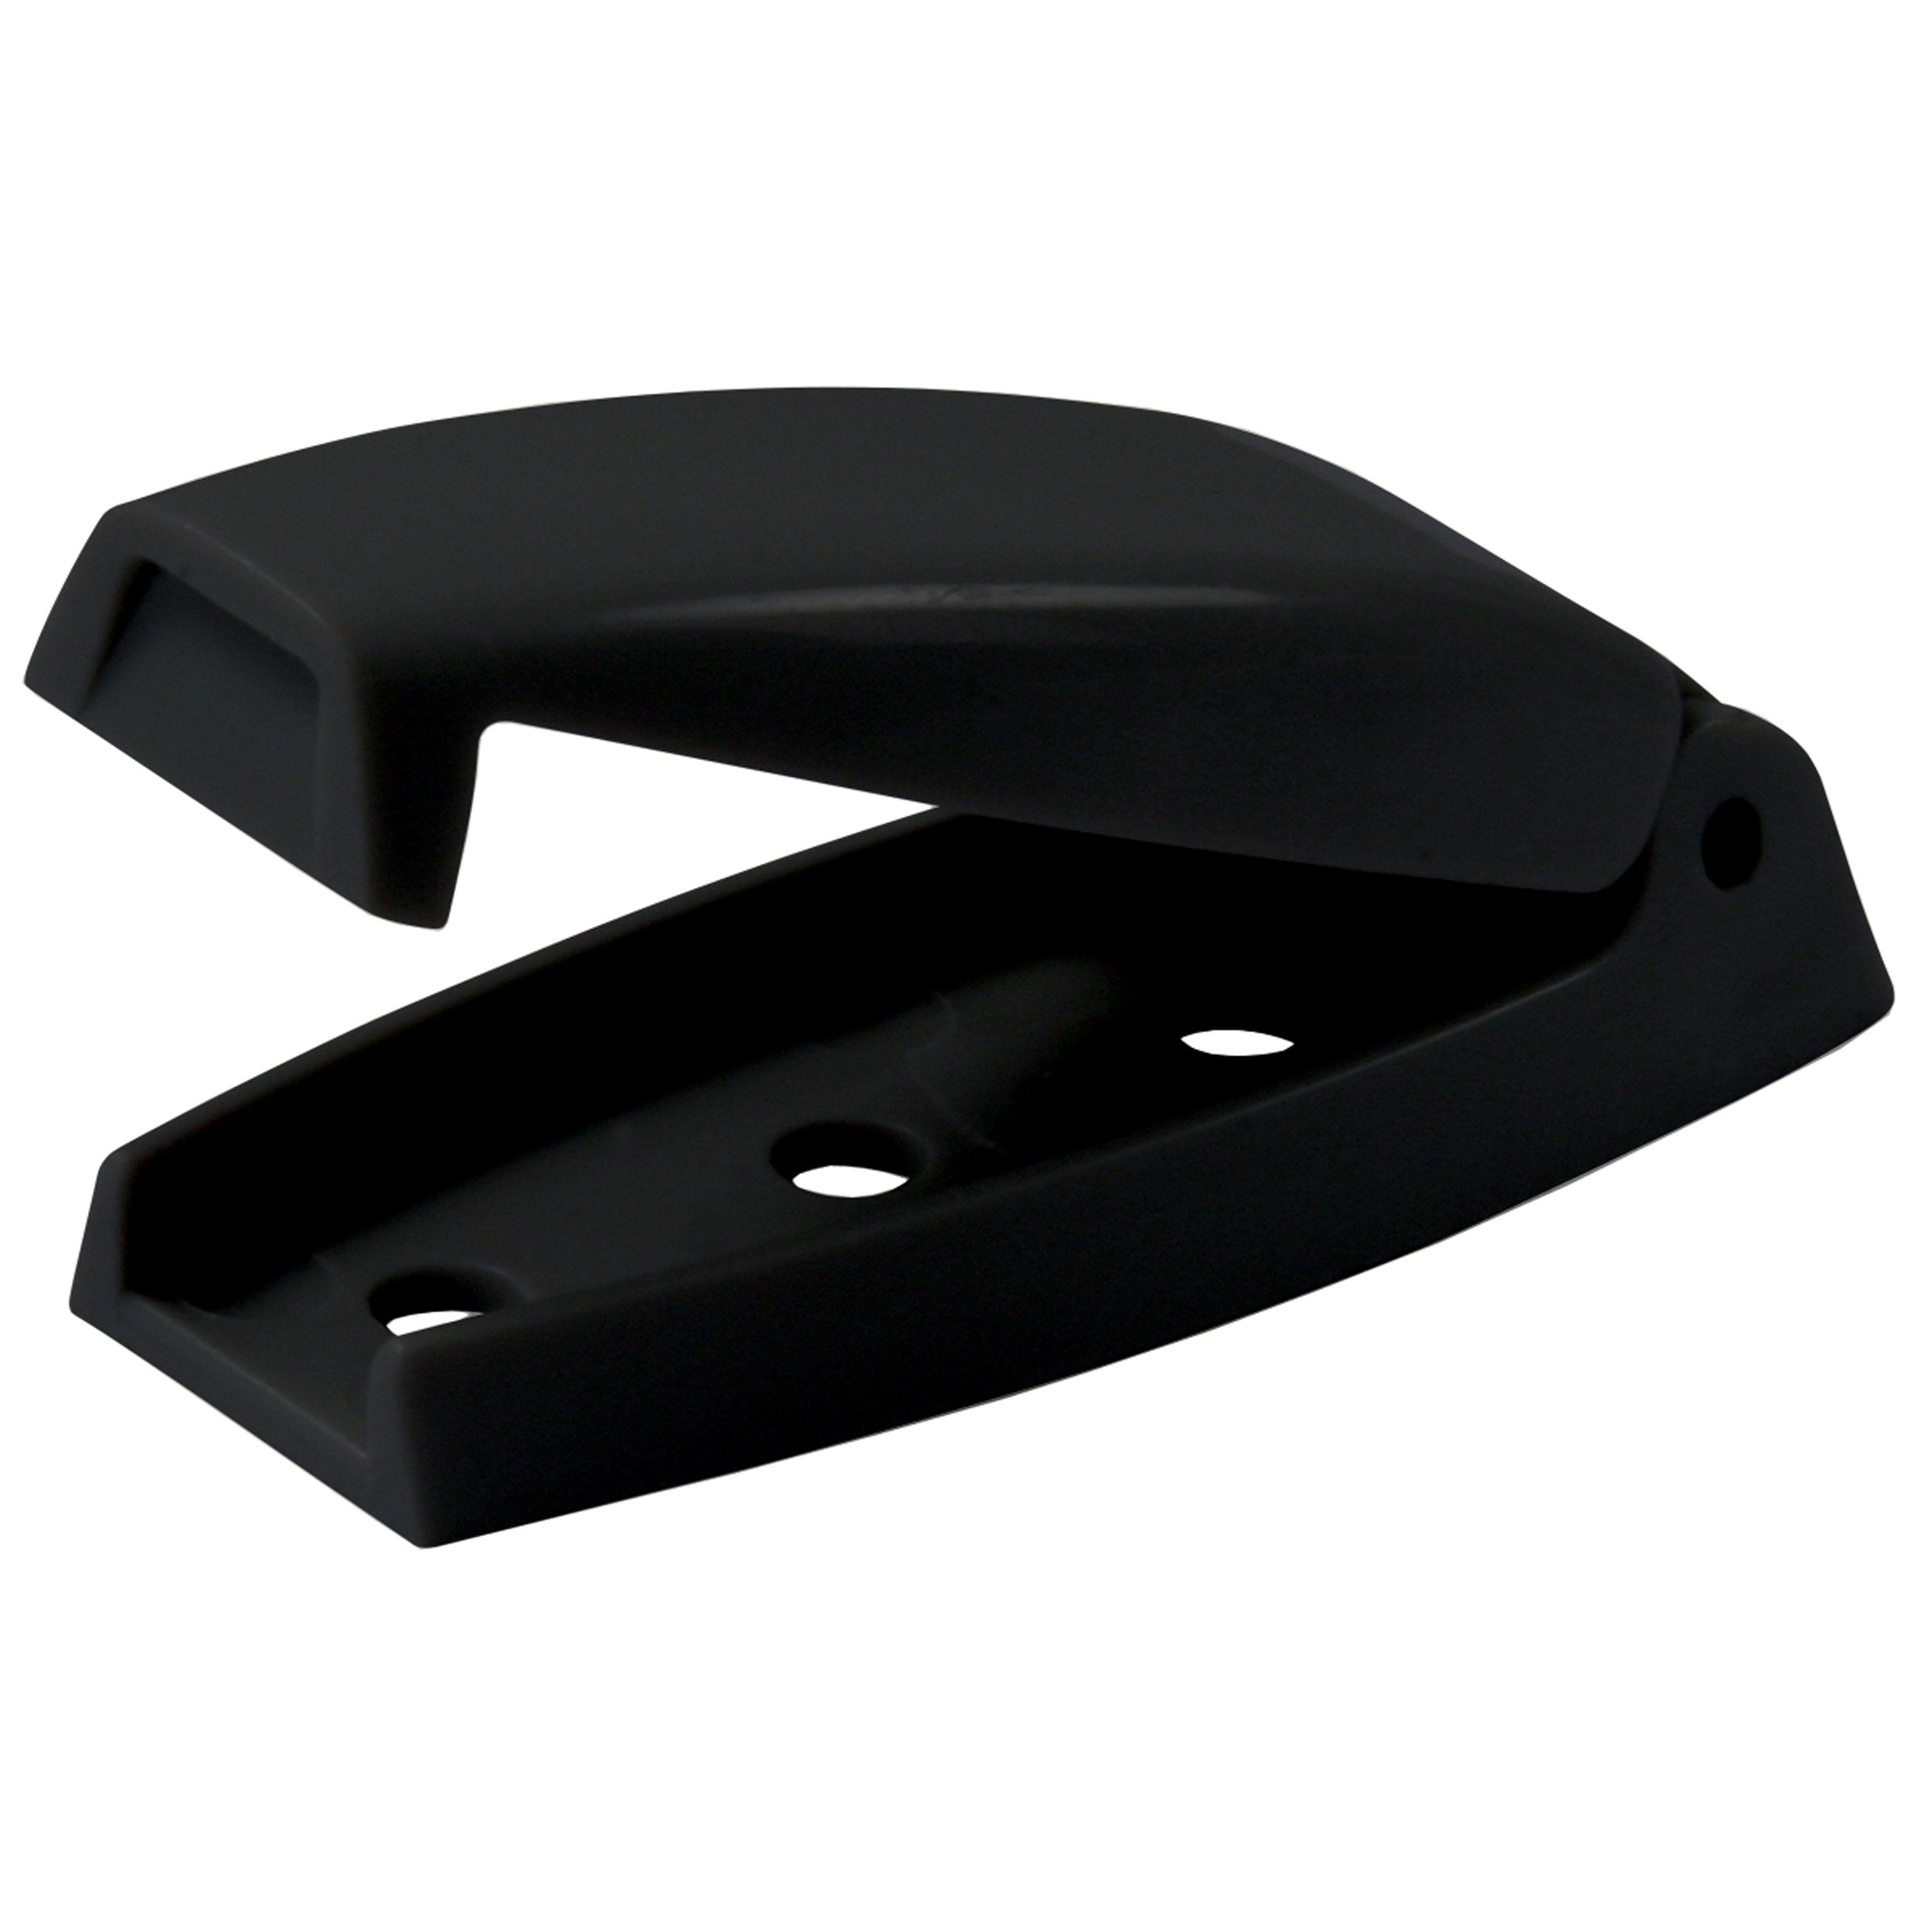 JR Products 10224 Baggage Door Catch - Black, Pack of 2